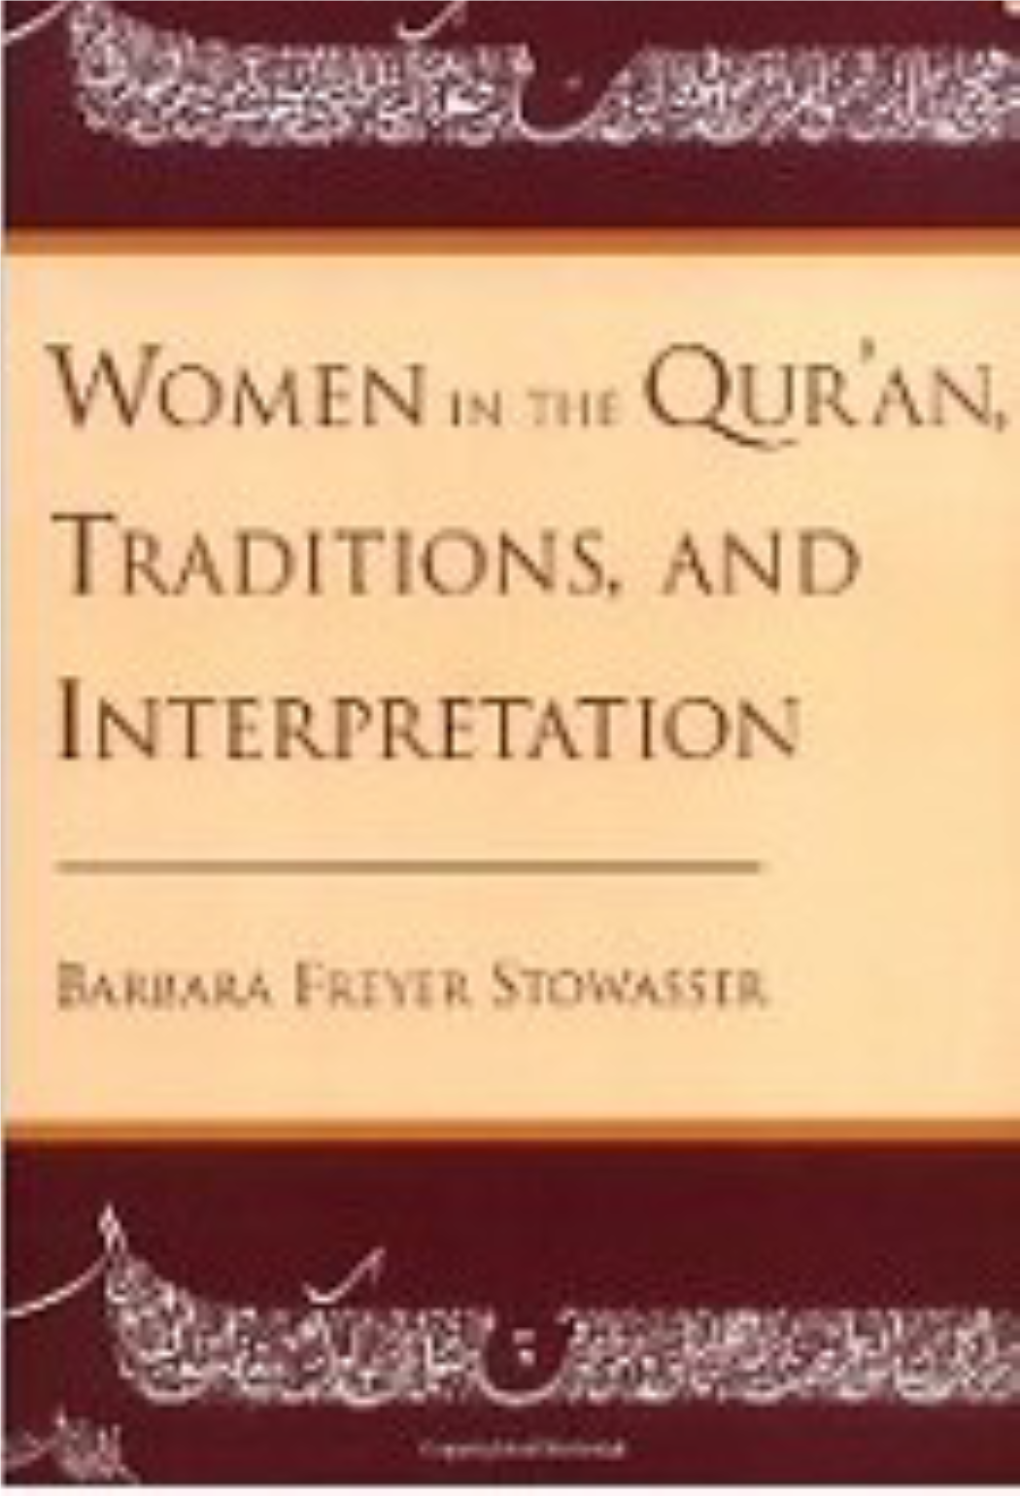 Women in the Qy.R'an, Traditions, and Interpretation